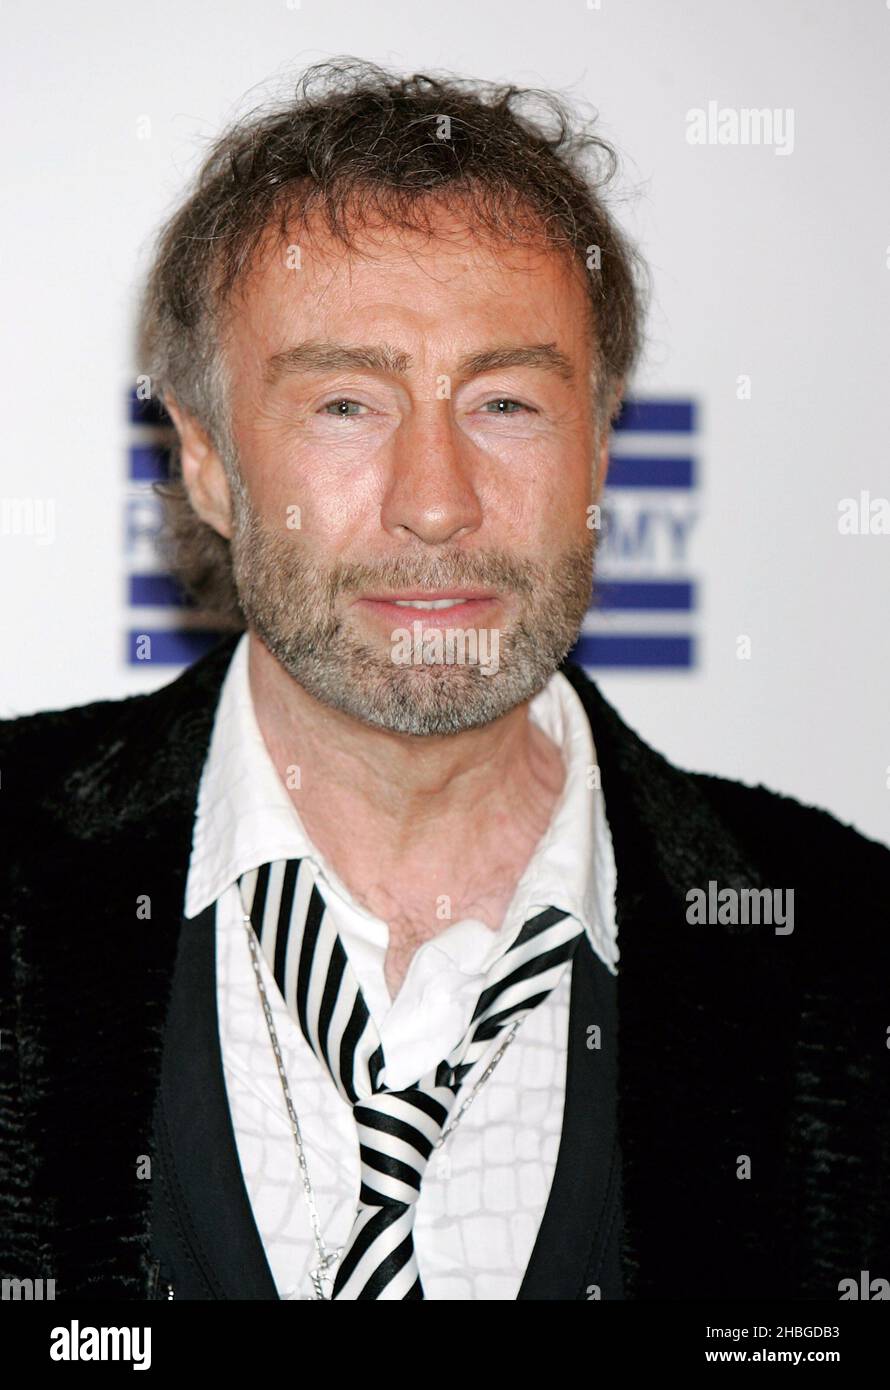 Paul Rodgers attends the Sony Radio Awards at the Grosvenor House Hotel in Central London. Stock Photo